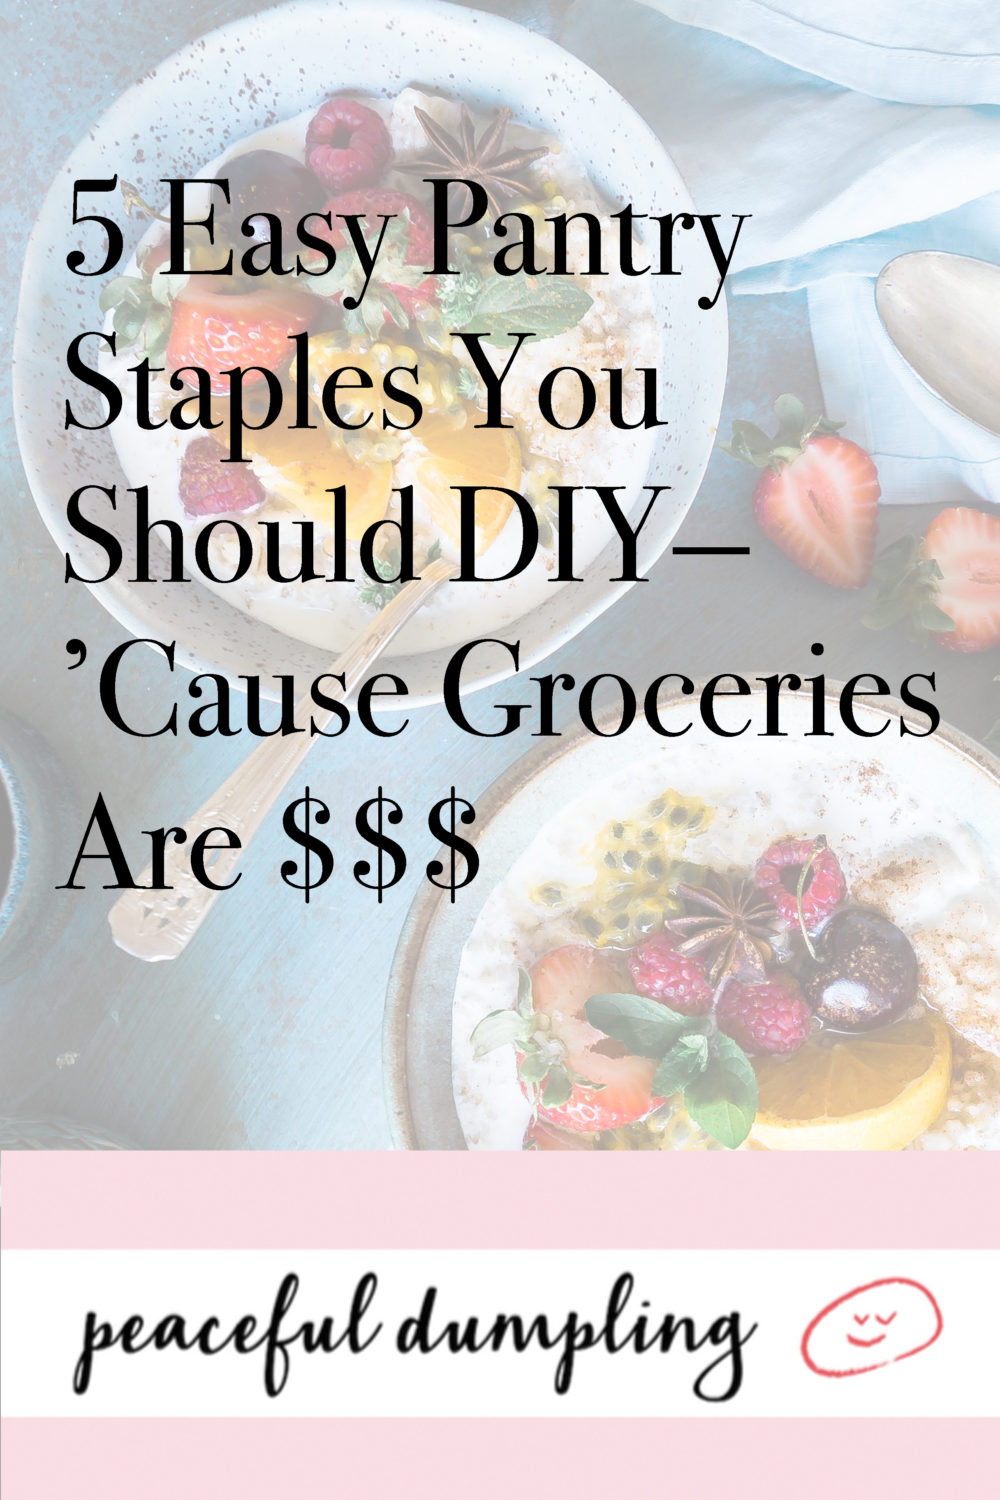 5 Easy Pantry Staples You Should DIY—‘Cause Groceries Are $$$